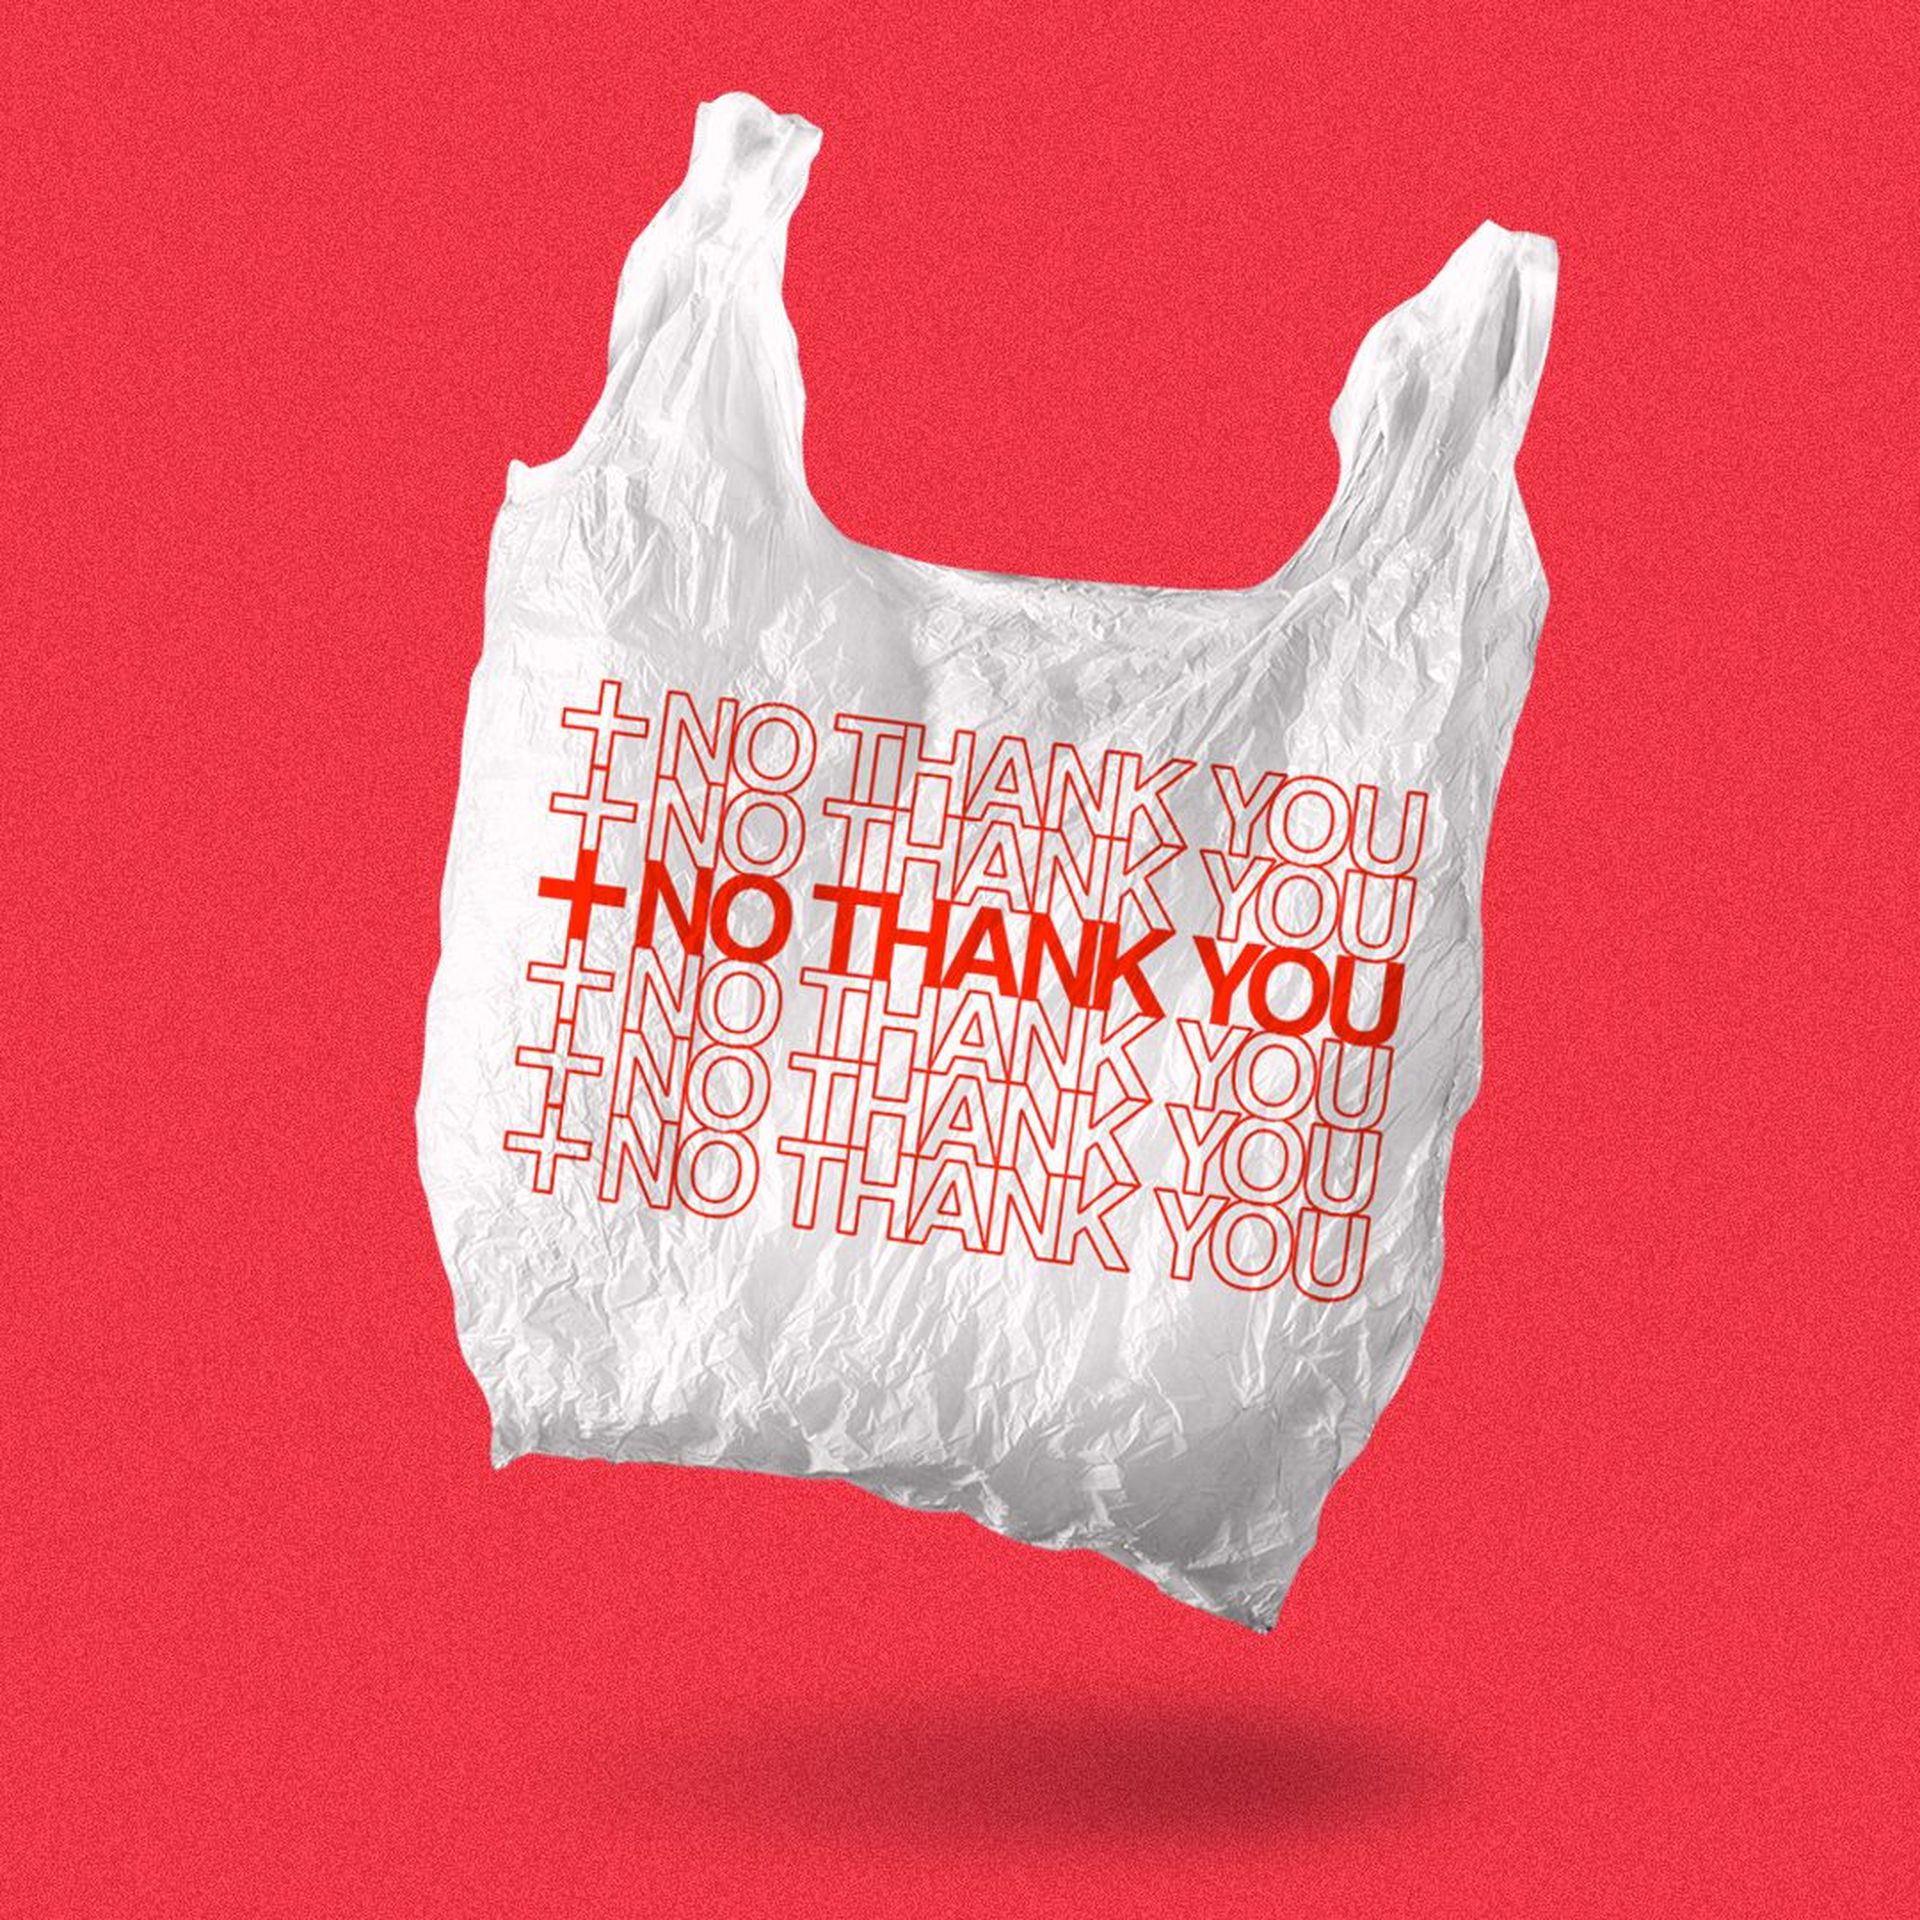 Transparent bags are for recycling, Latest, NDWorks